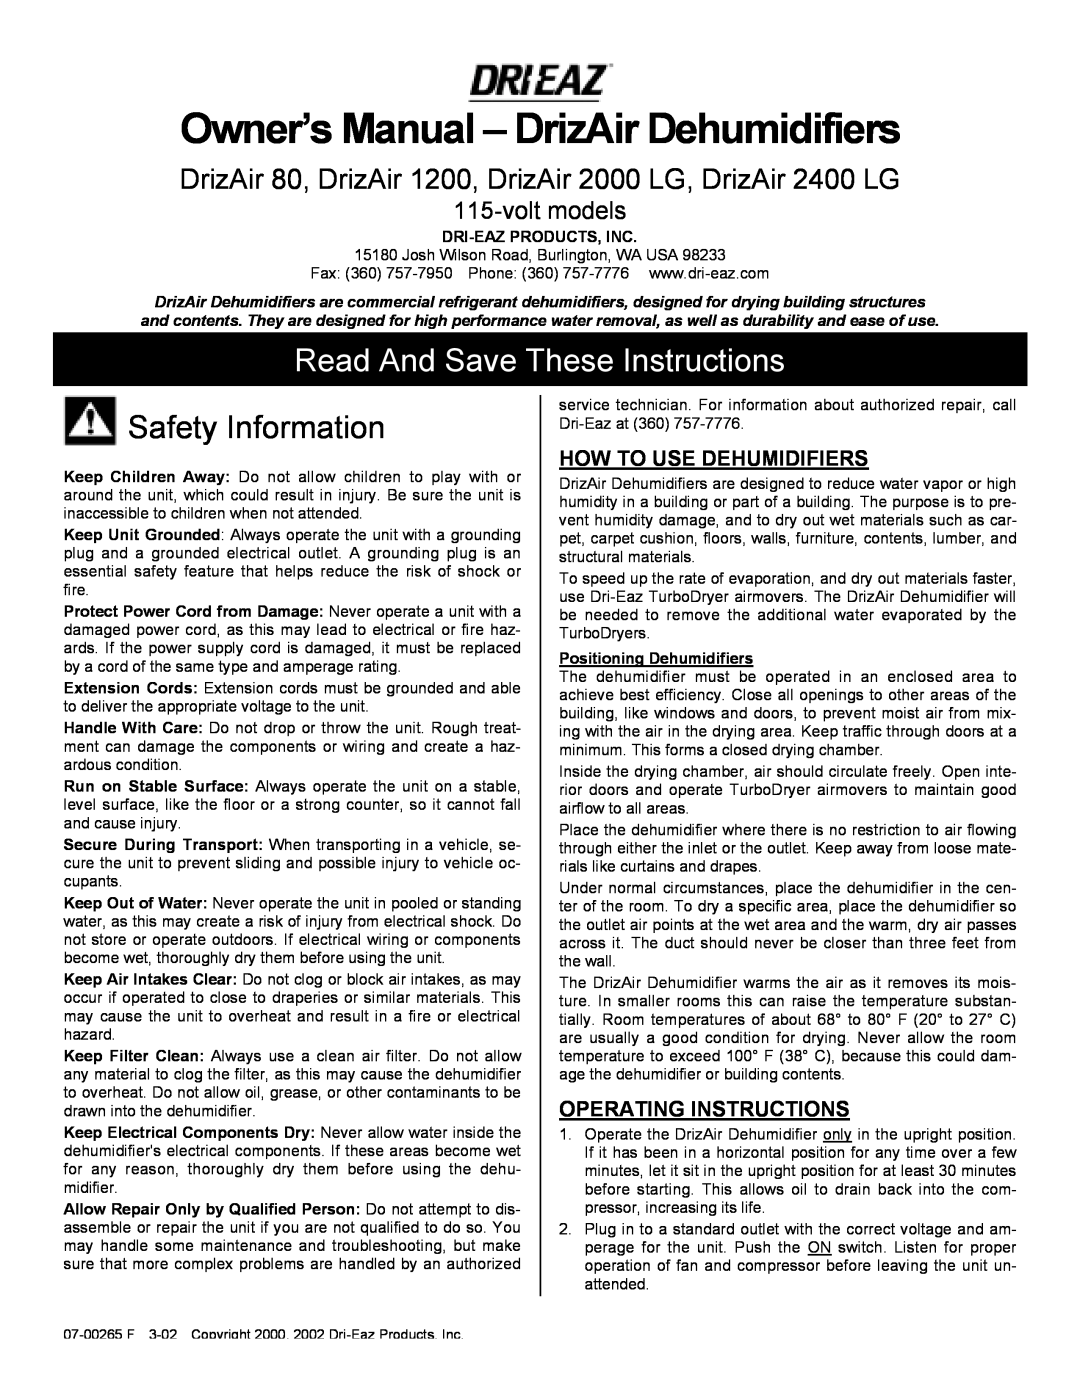 Dri-Eaz 80 owner manual How To Use Dehumidifiers, Operating Instructions, Read And Save These Instructions, voltmodels 